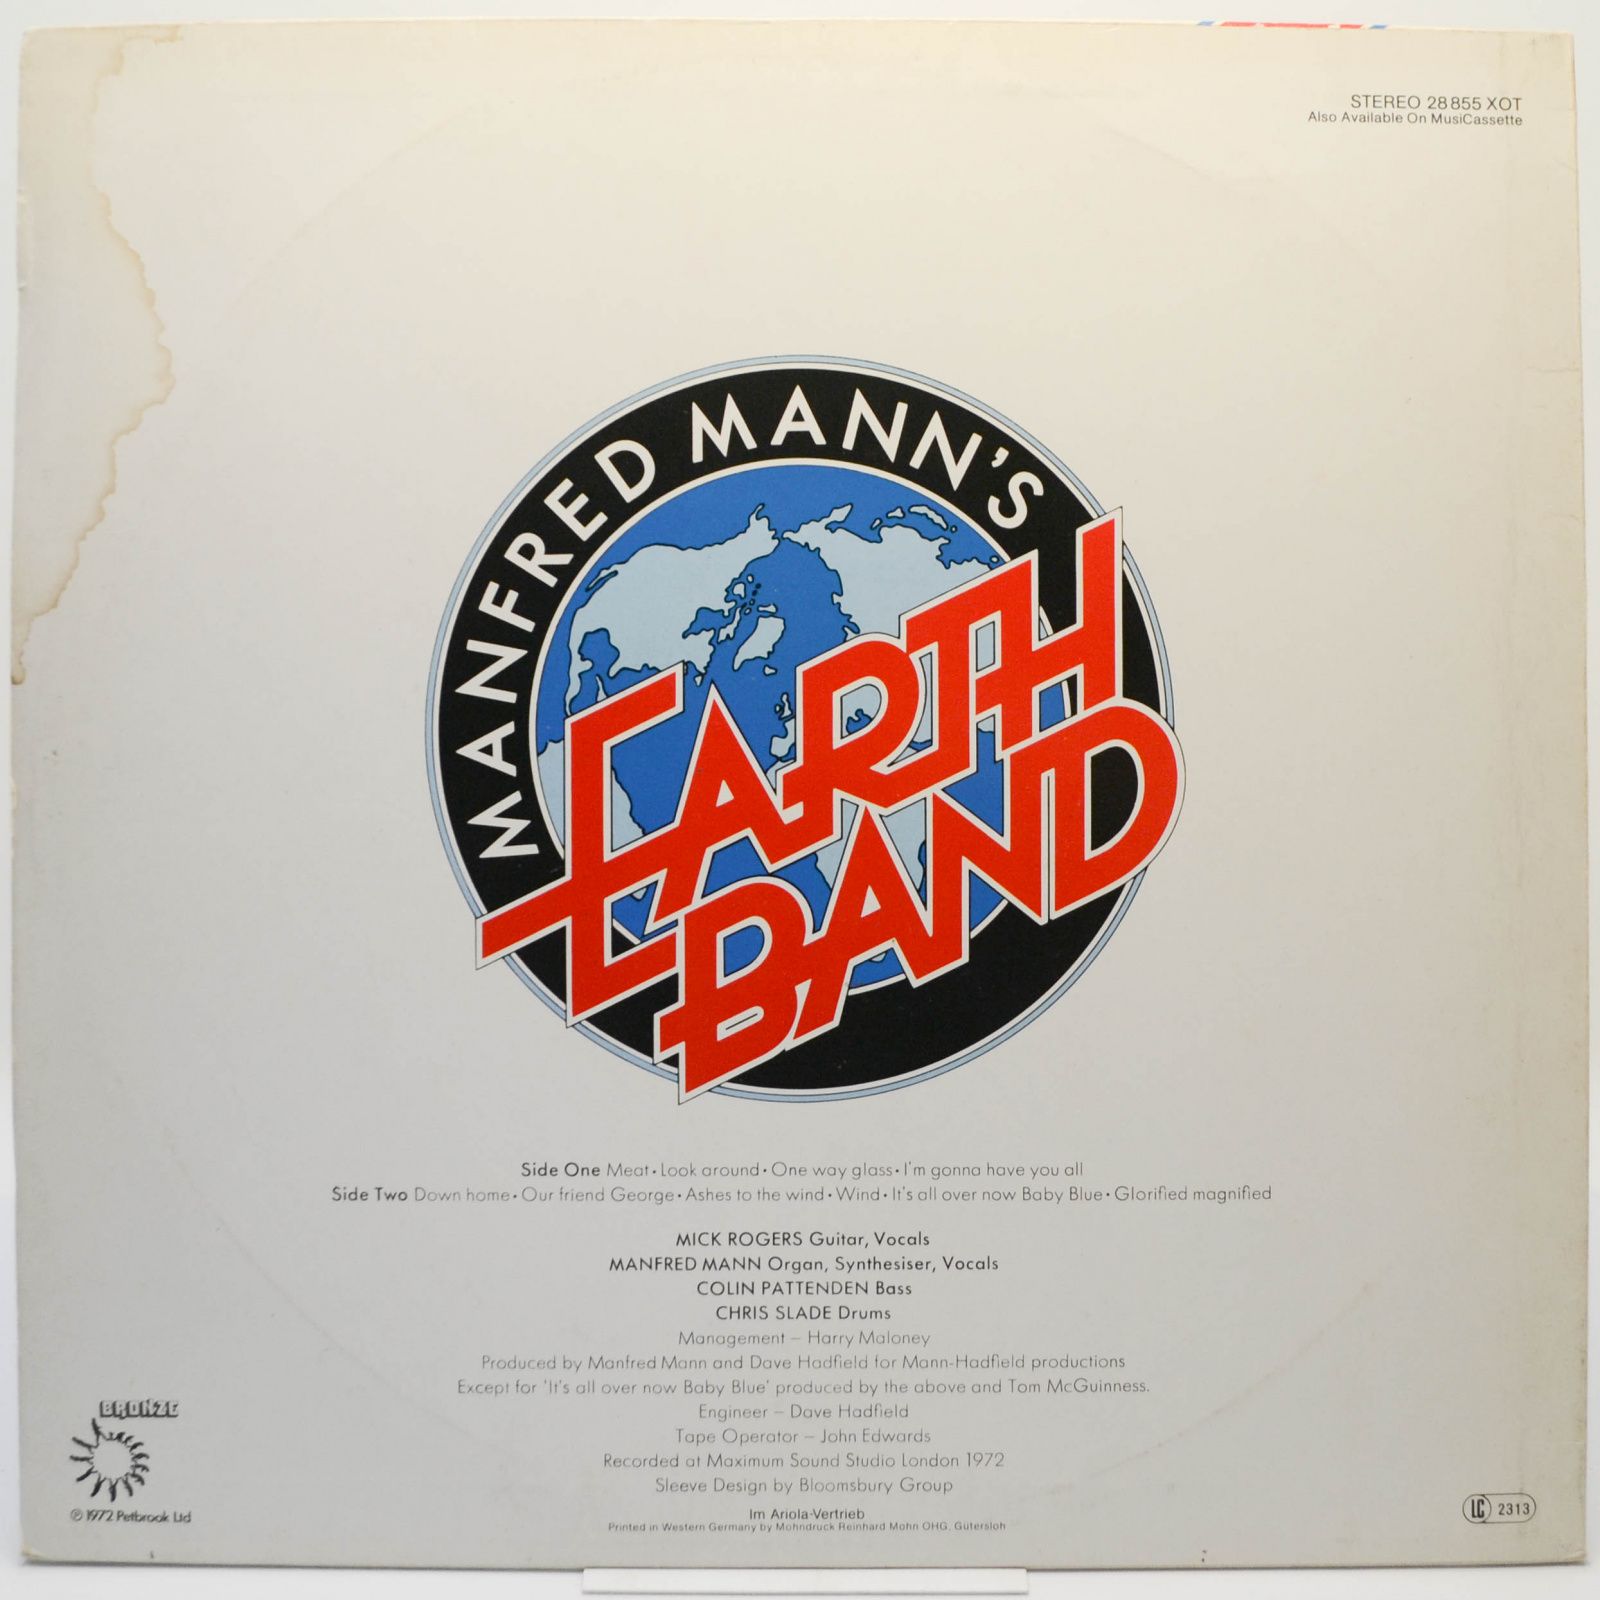 Manfred Mann's Earth Band — Glorified Magnified, 1972